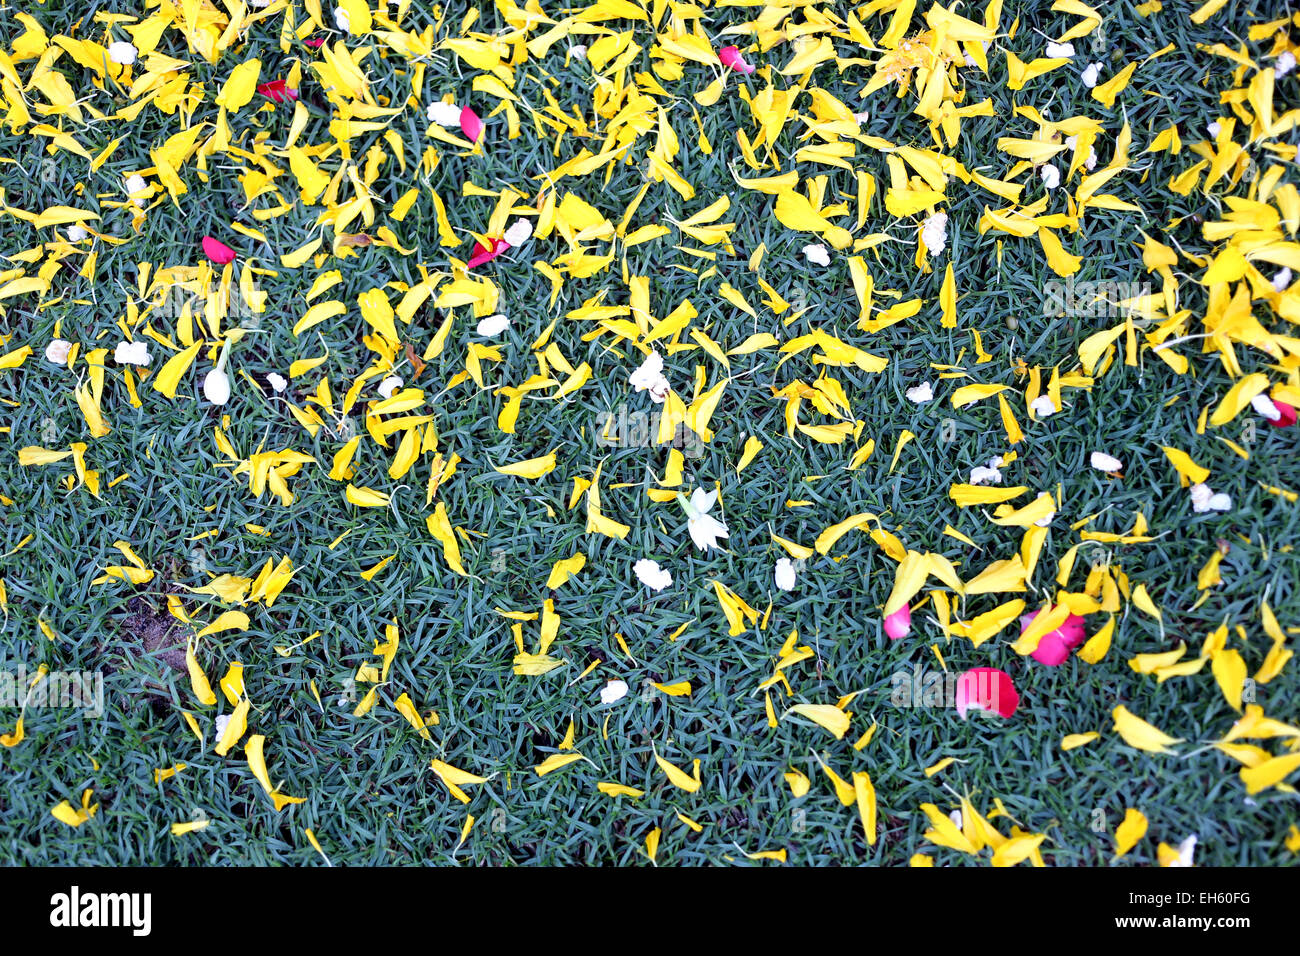 Green of ground lawn with flower petals campsites are for the background. Stock Photo